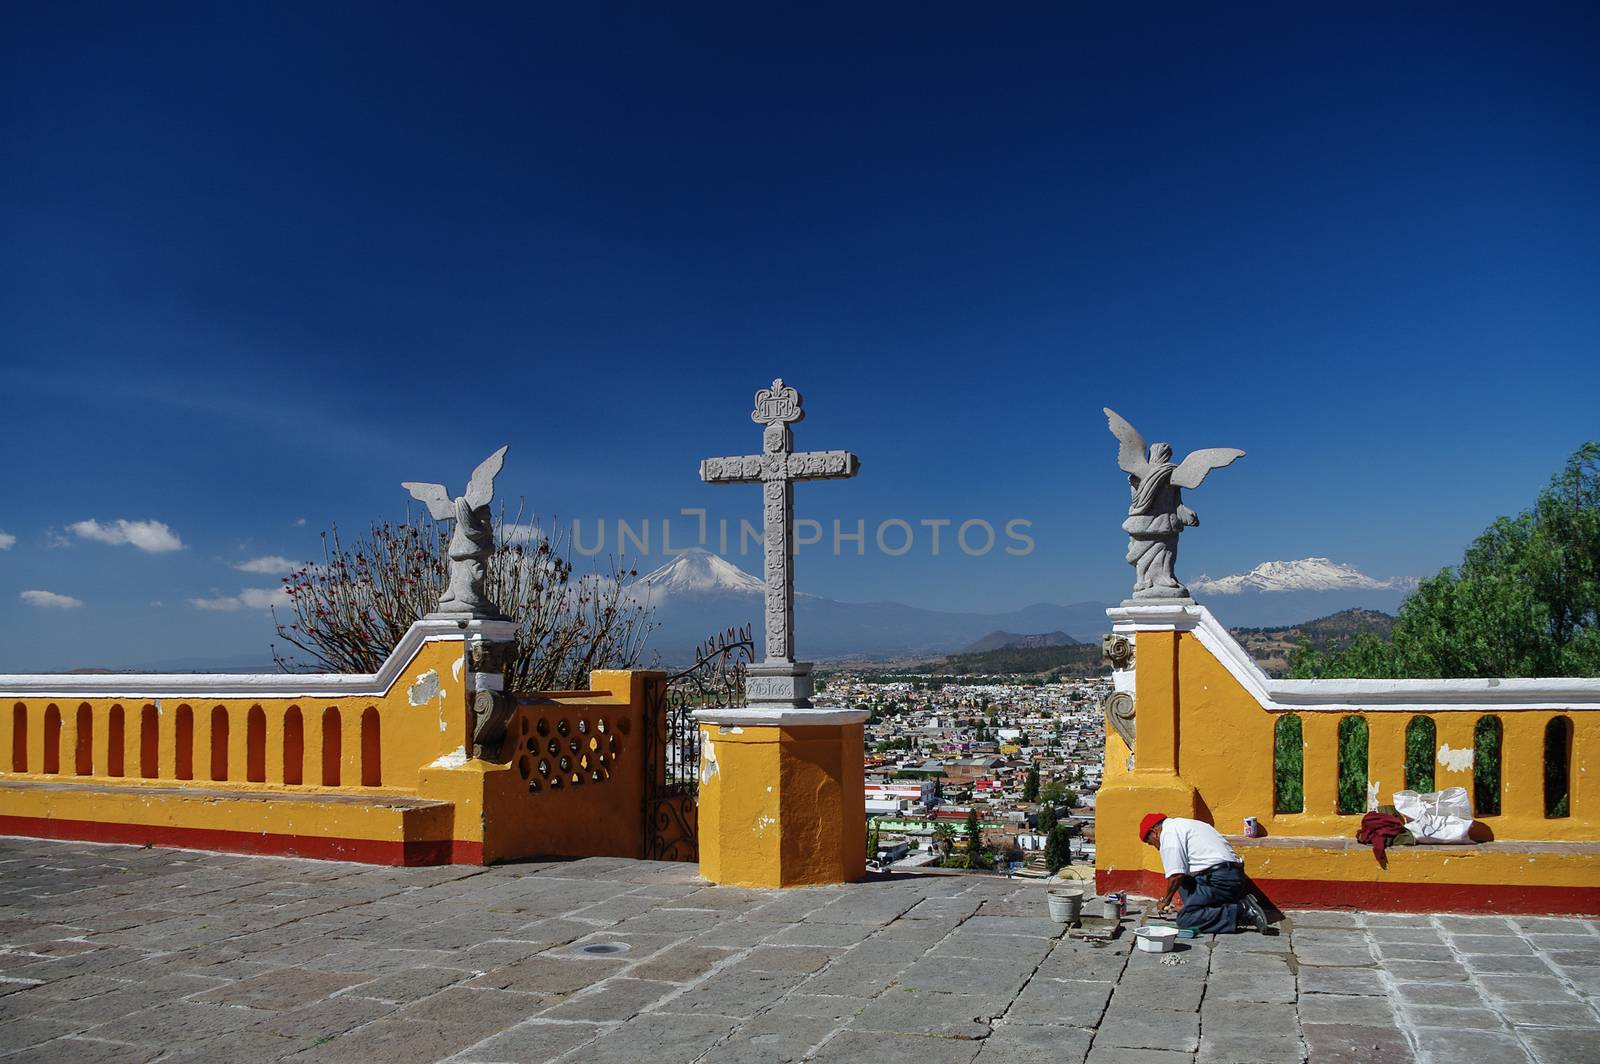 Puebla, Mexico - January 20, 2010: Church of Our Lady of Remedies on top of the Cholula Pyramid in Puebla, Mexico. Aerial view of the city and Popocatepetl volcano